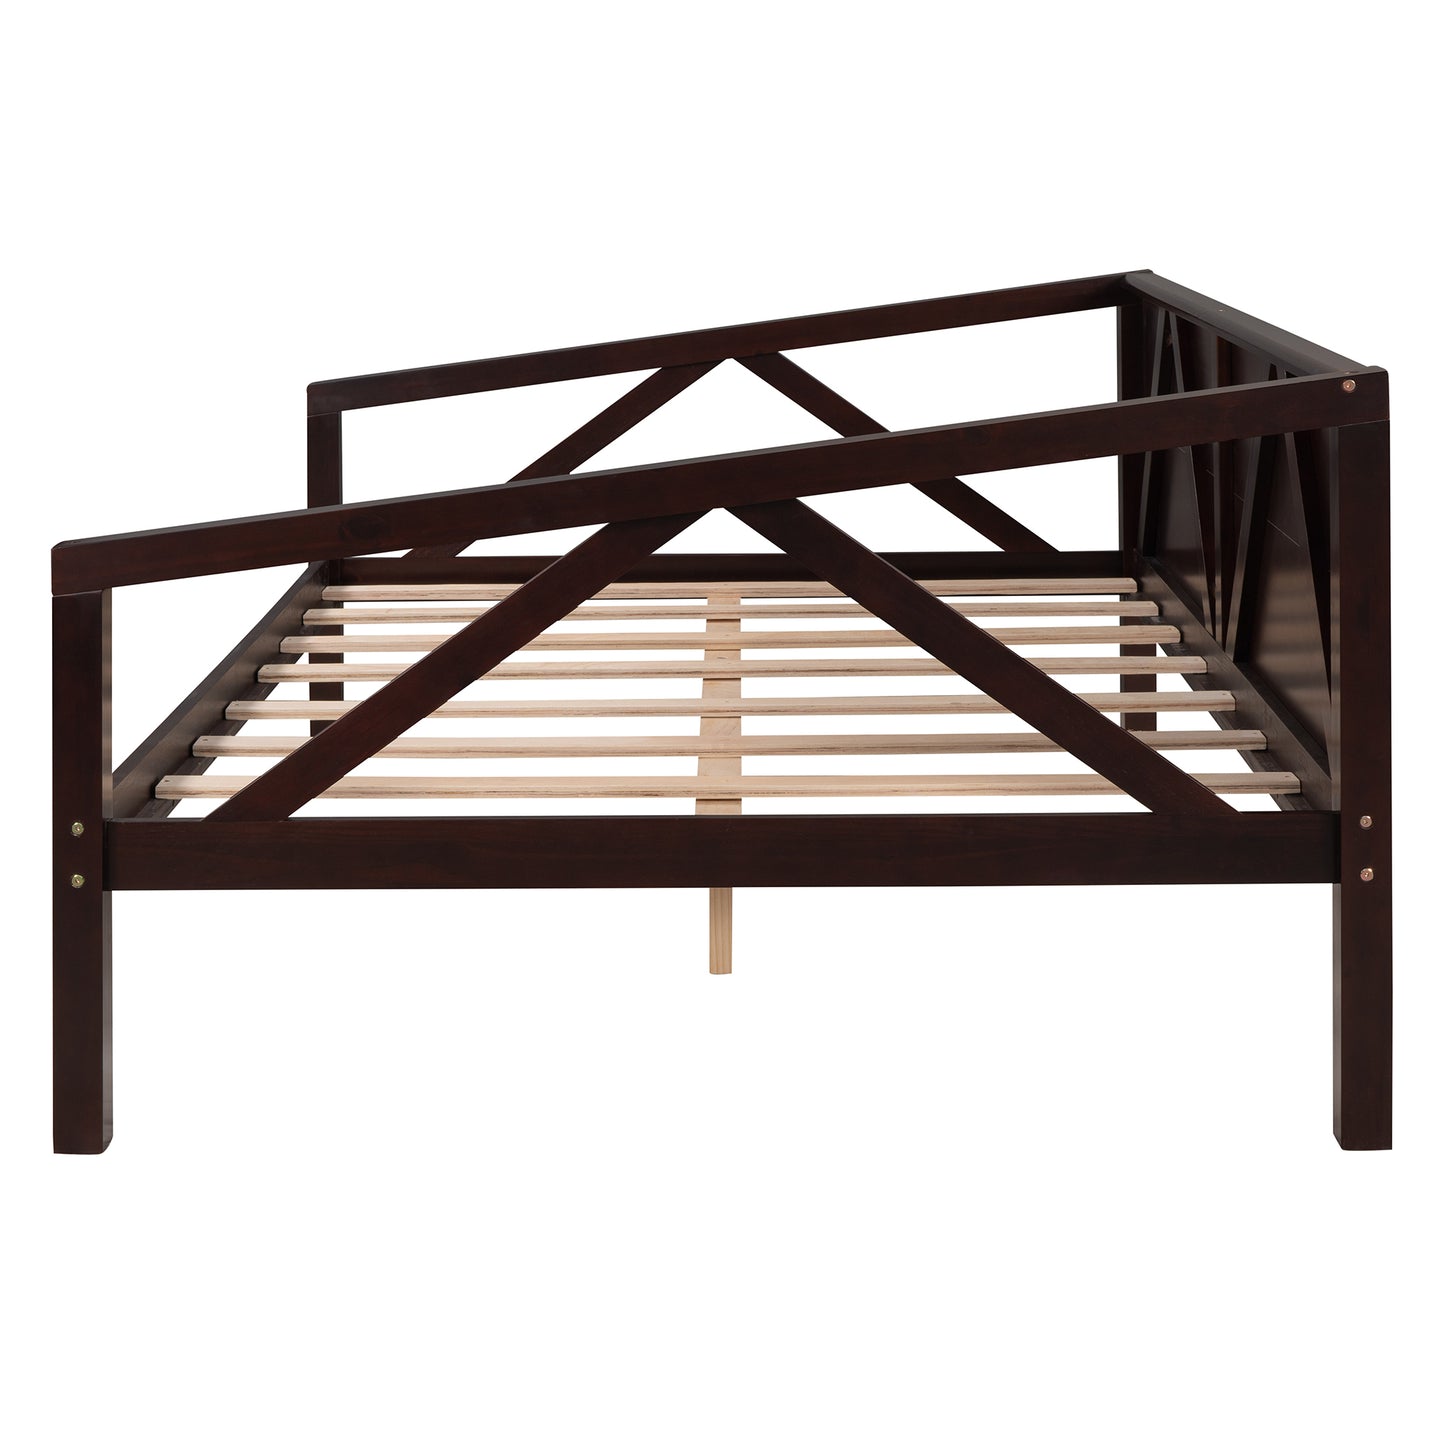 Full size Daybed, Wood Slat Support, Espresso